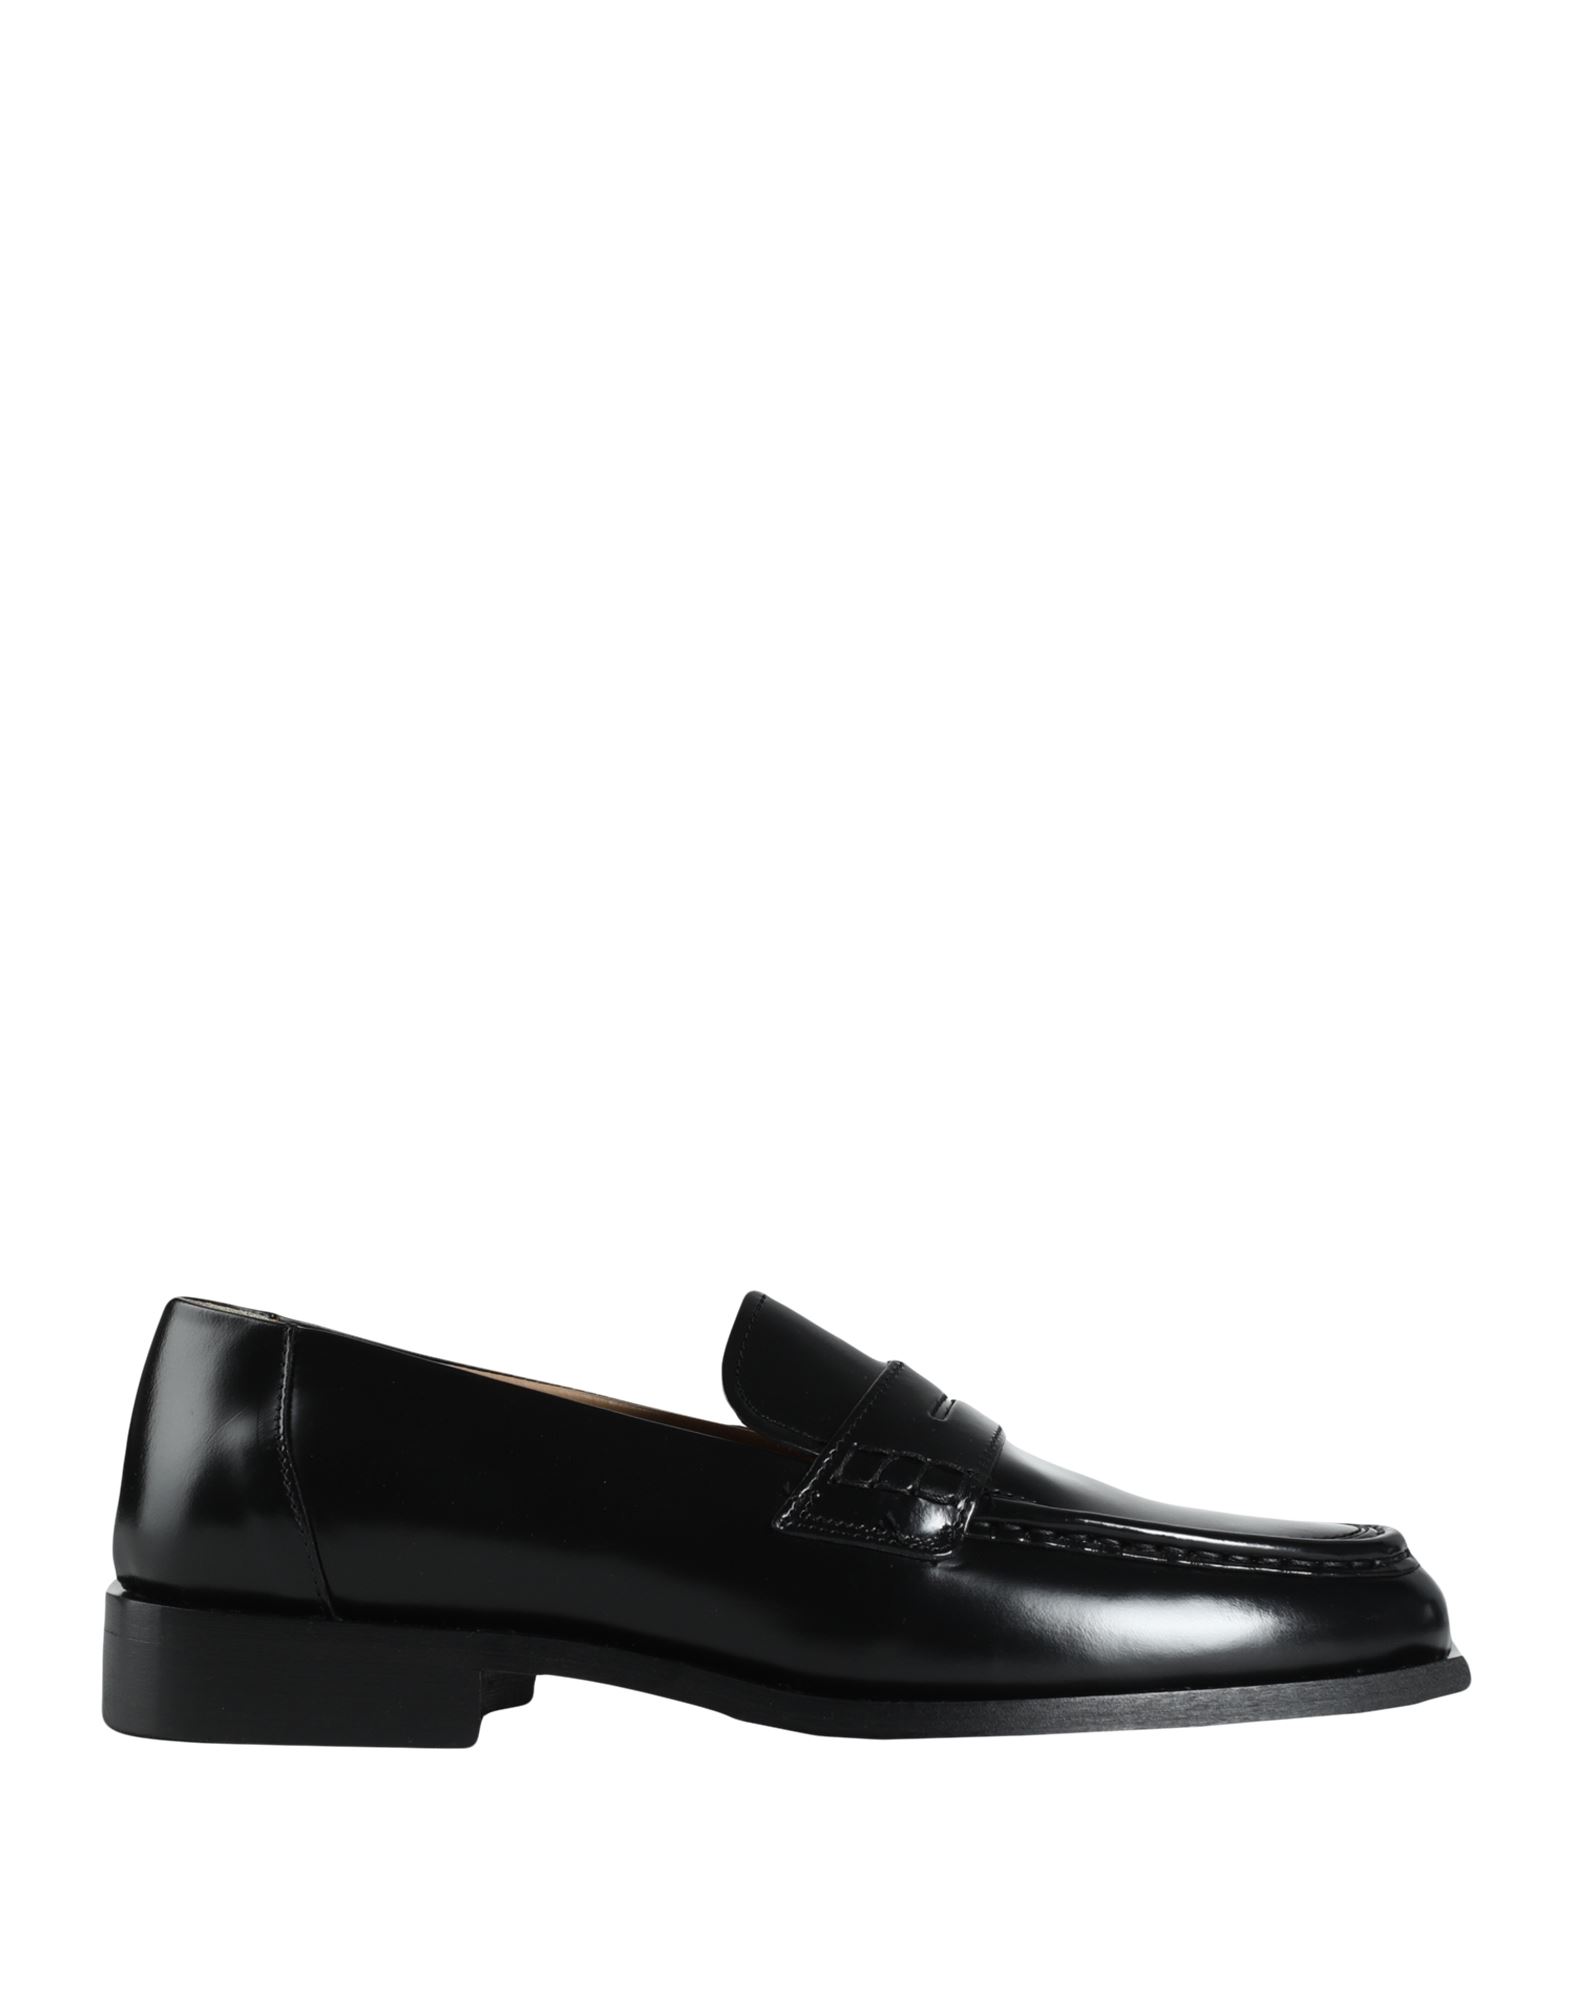 OTHER STORIES & OTHER STORIES WOMAN LOAFERS BLACK SIZE 8 SOFT LEATHER